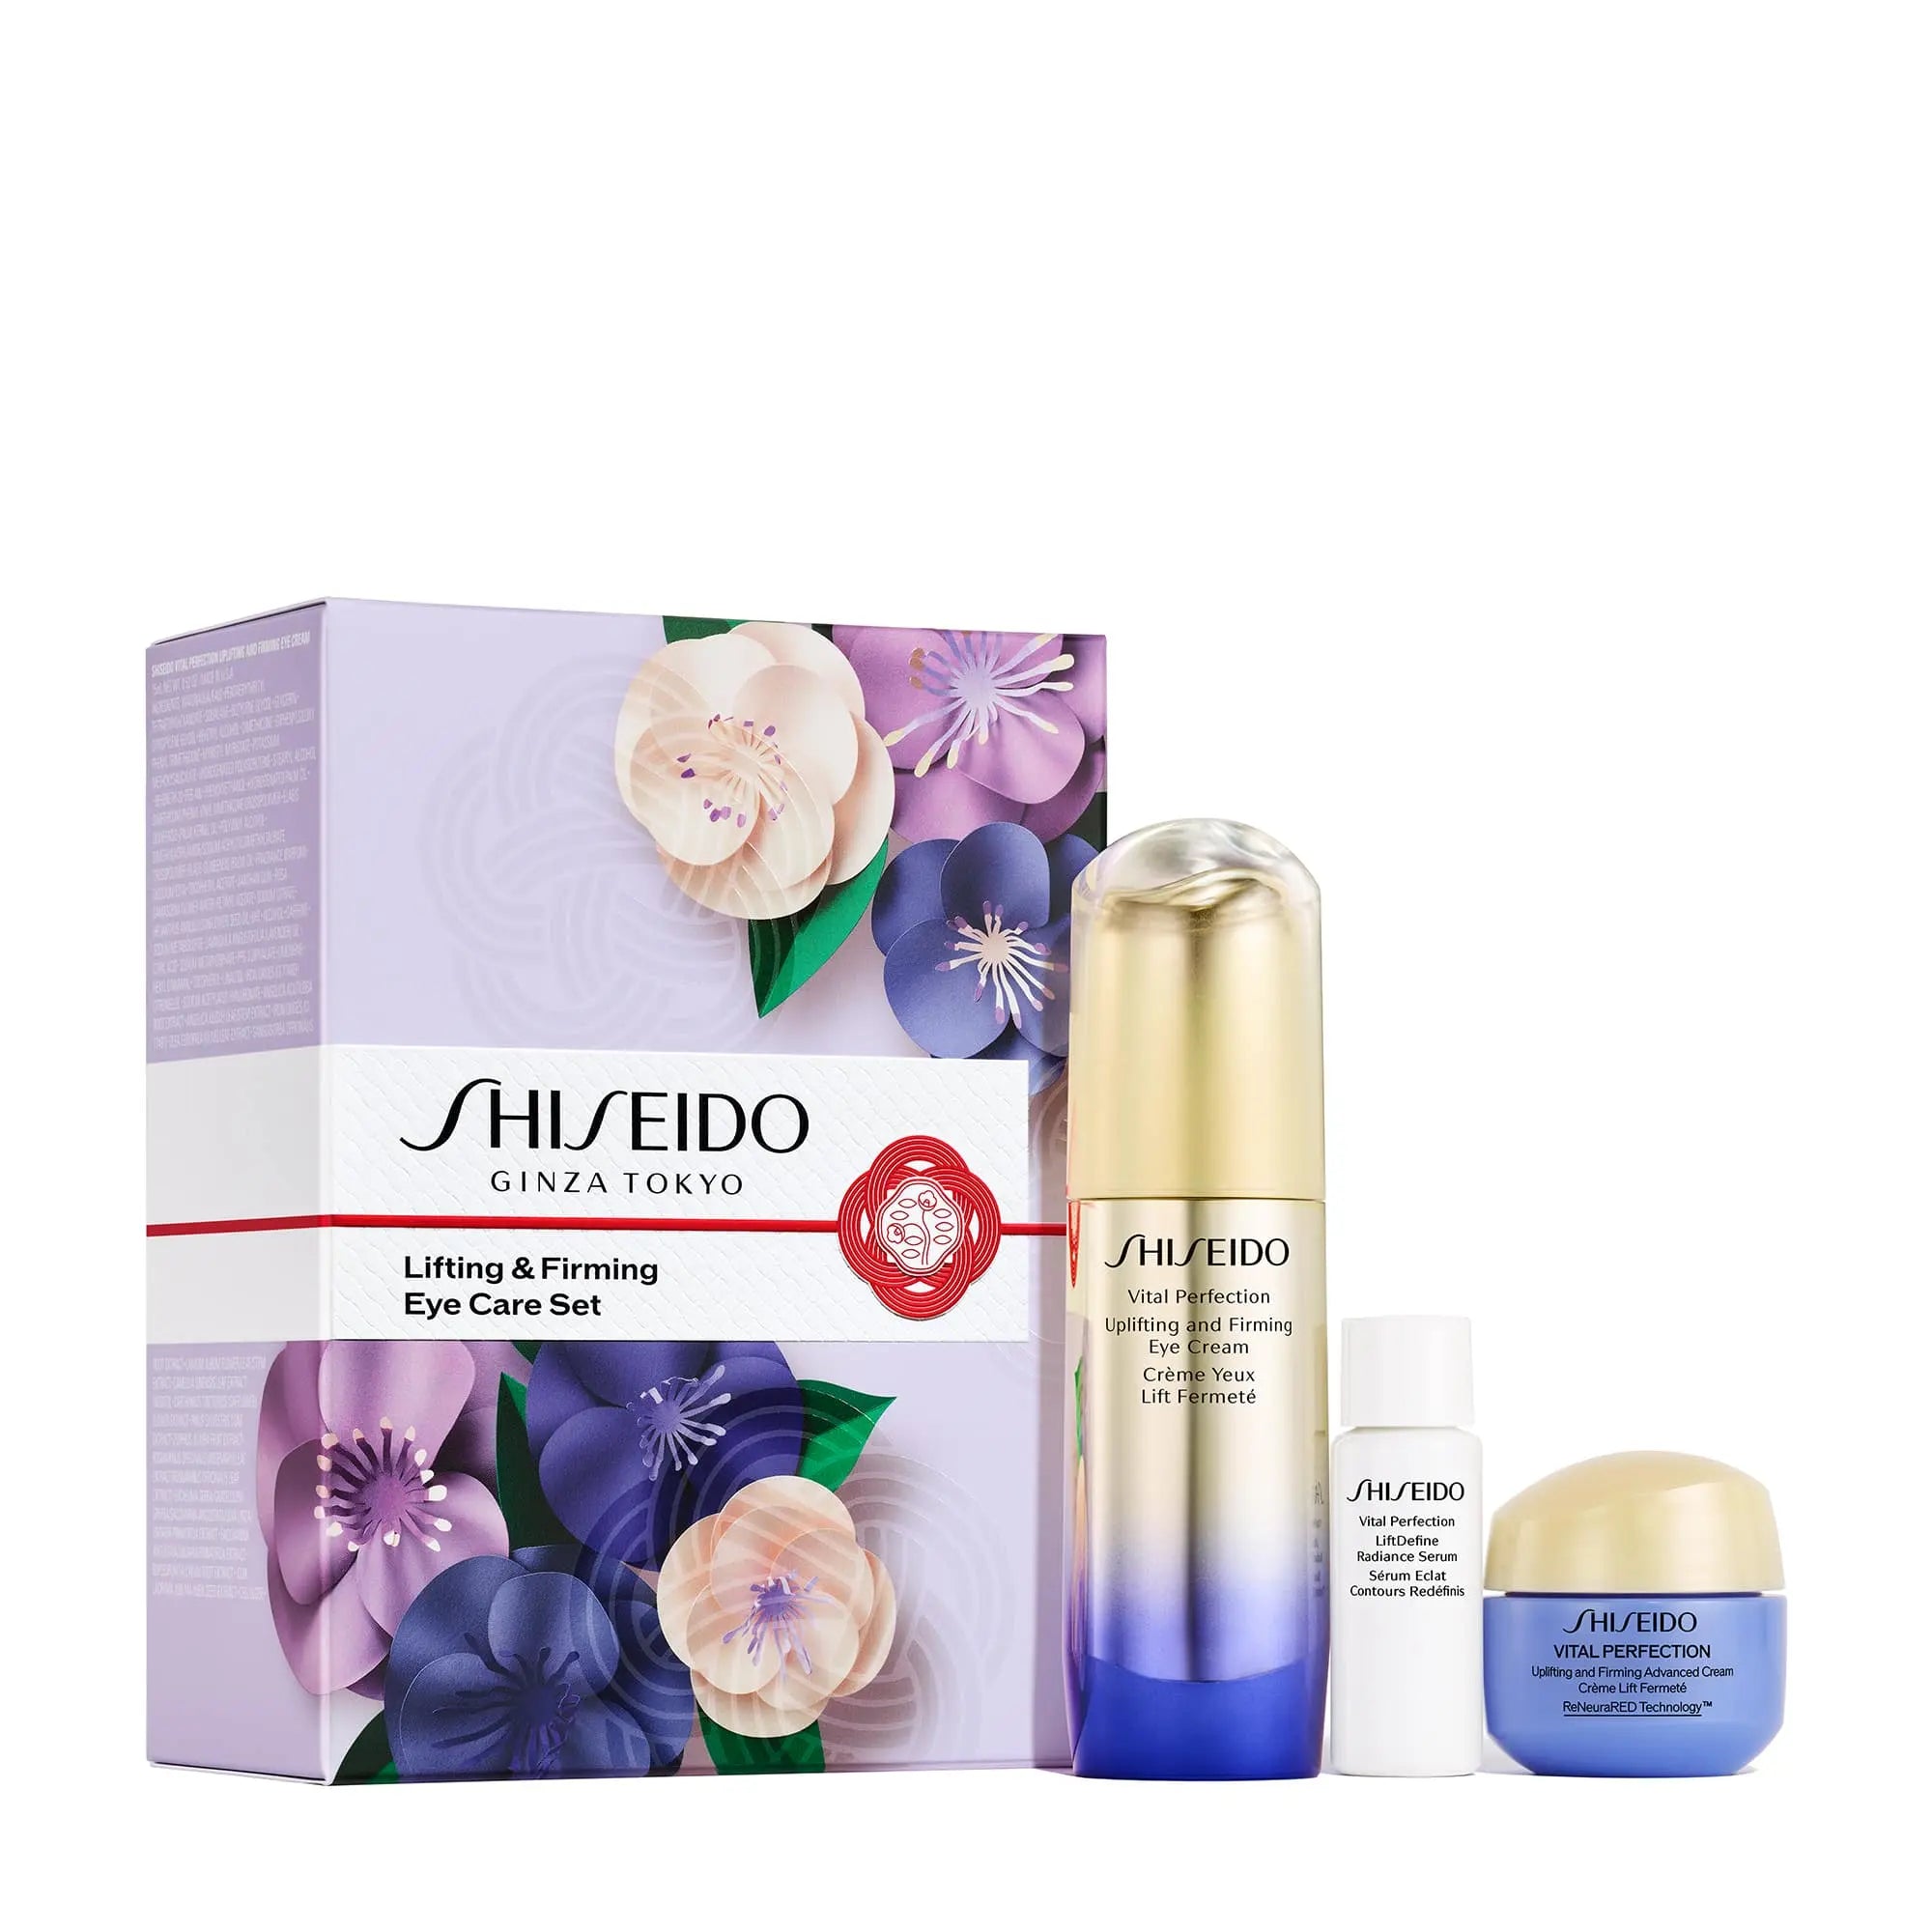 Lifting & Firming Eye Care Set($134 Value)